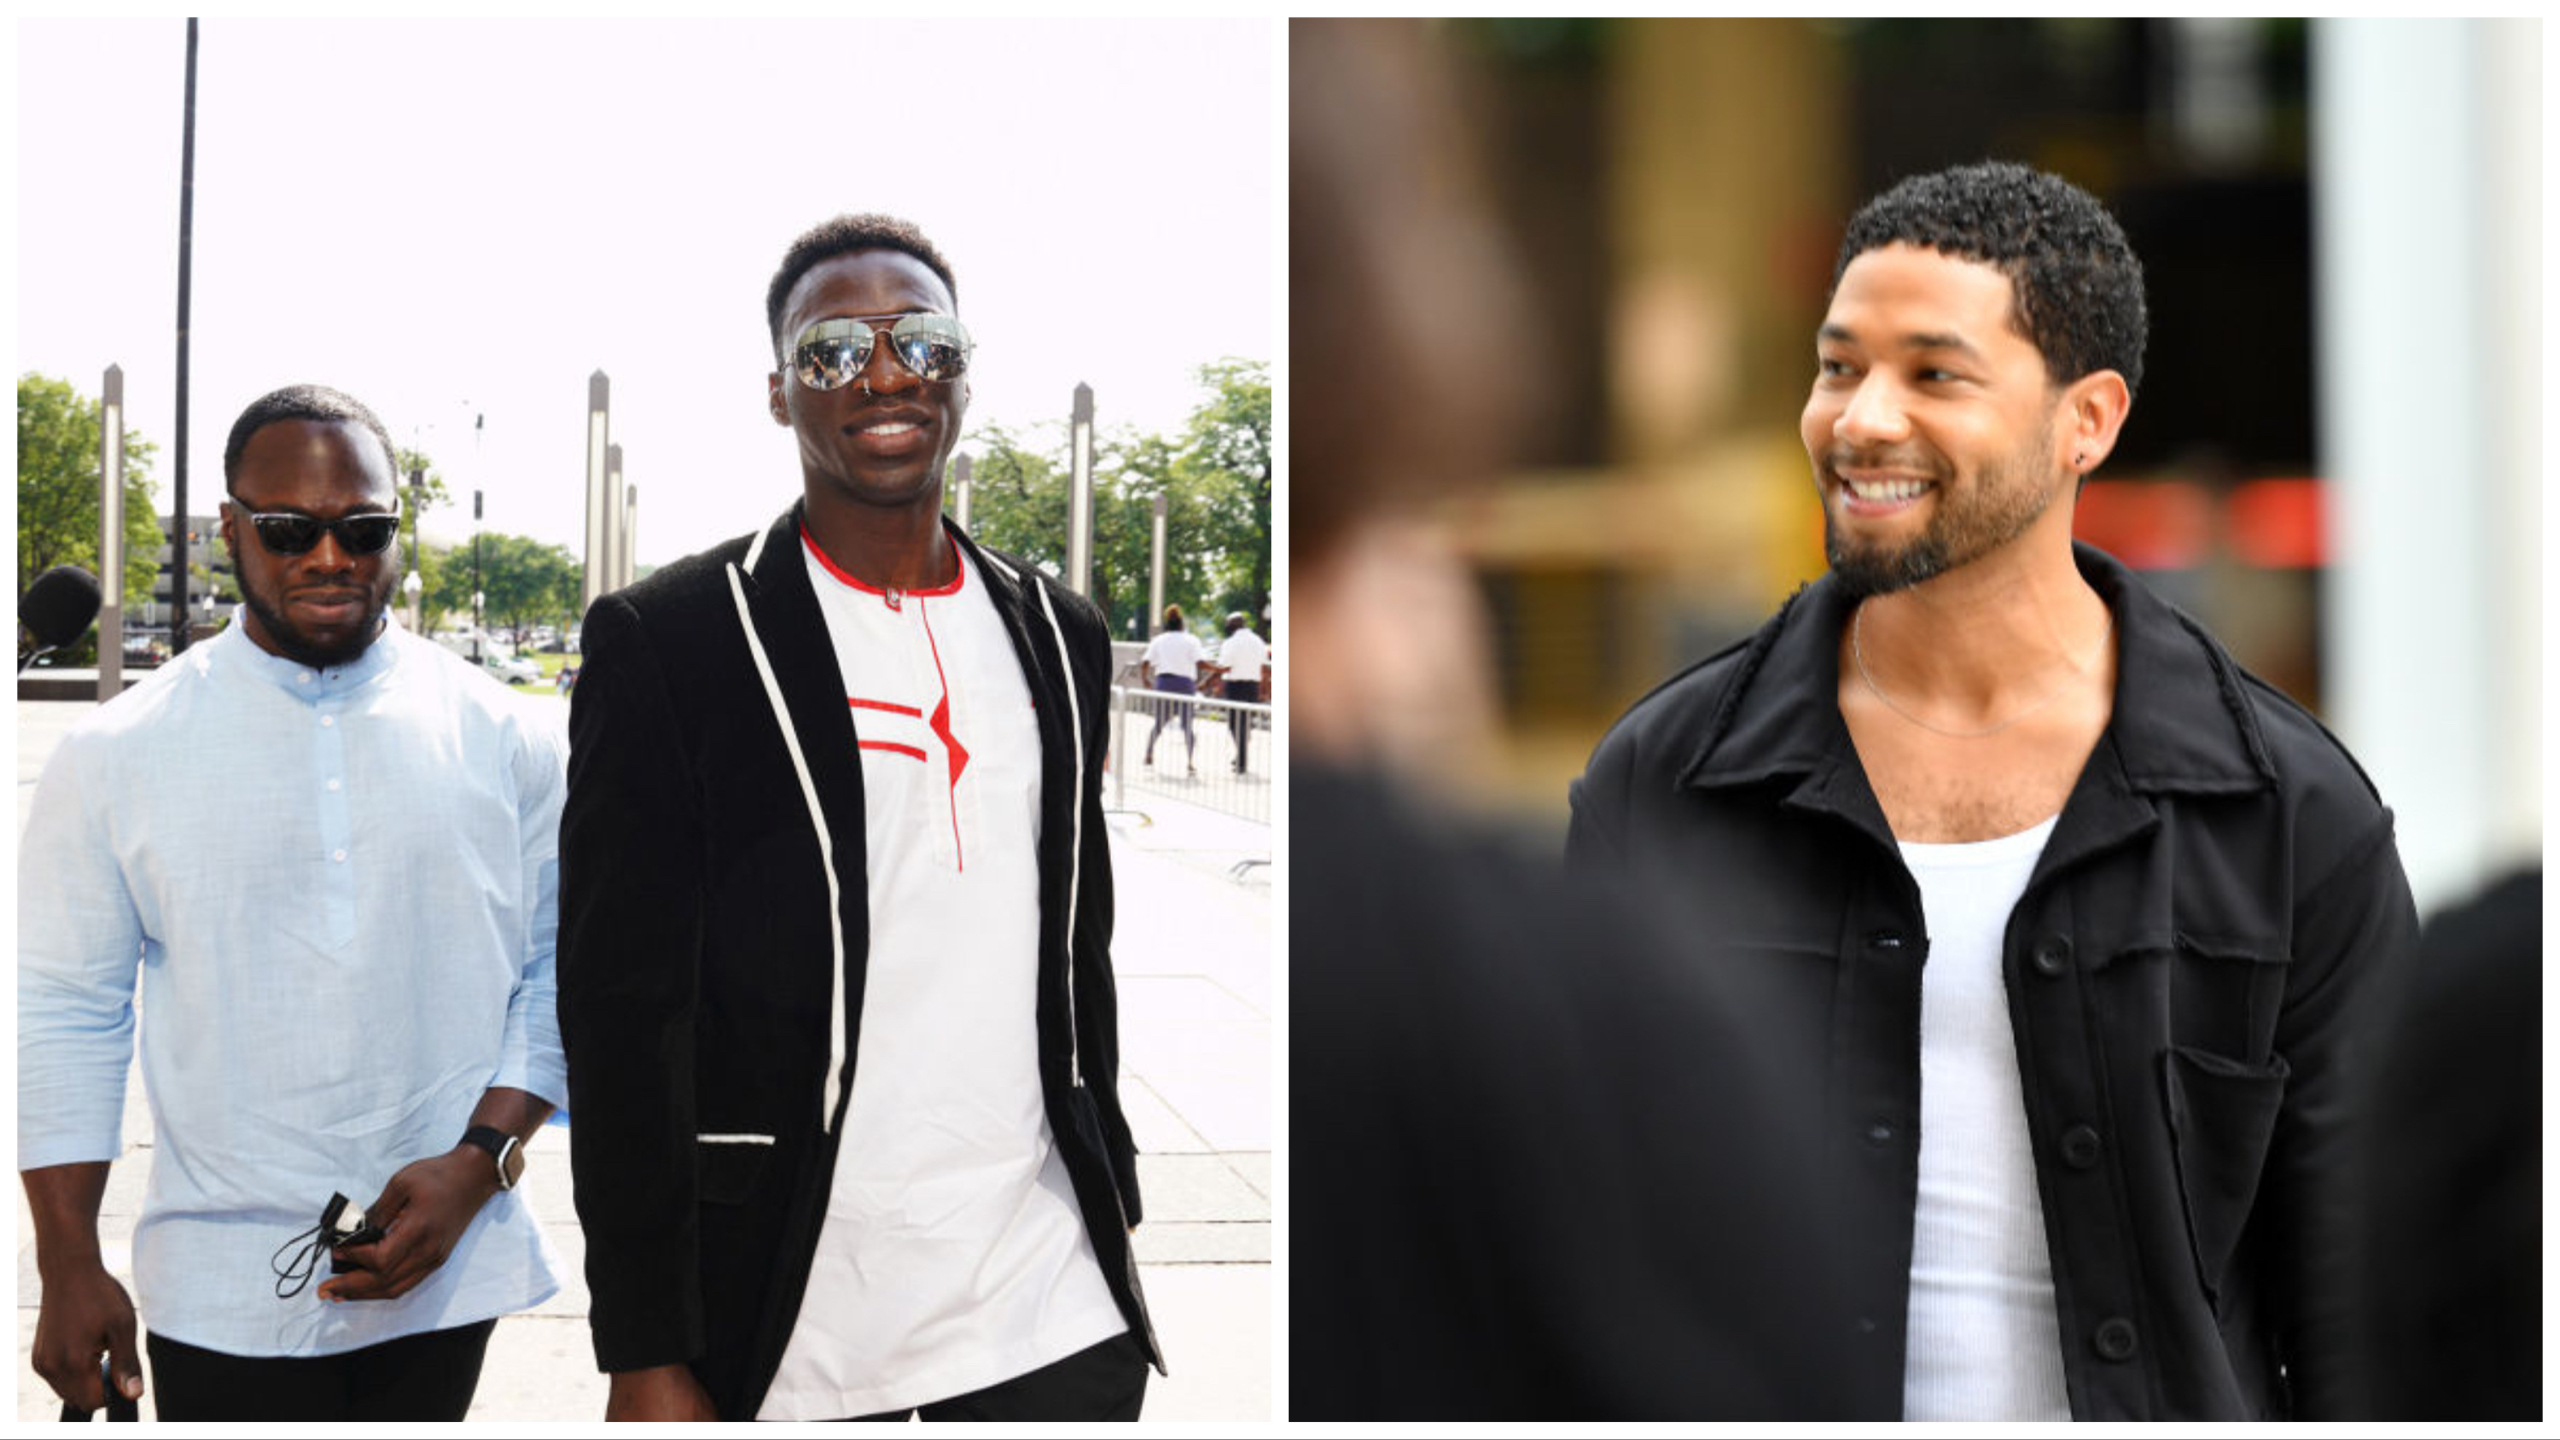 ‘Like A Supervillain’: Nigerian Brothers Hired By Jussie Smollett Speak Out For First Time